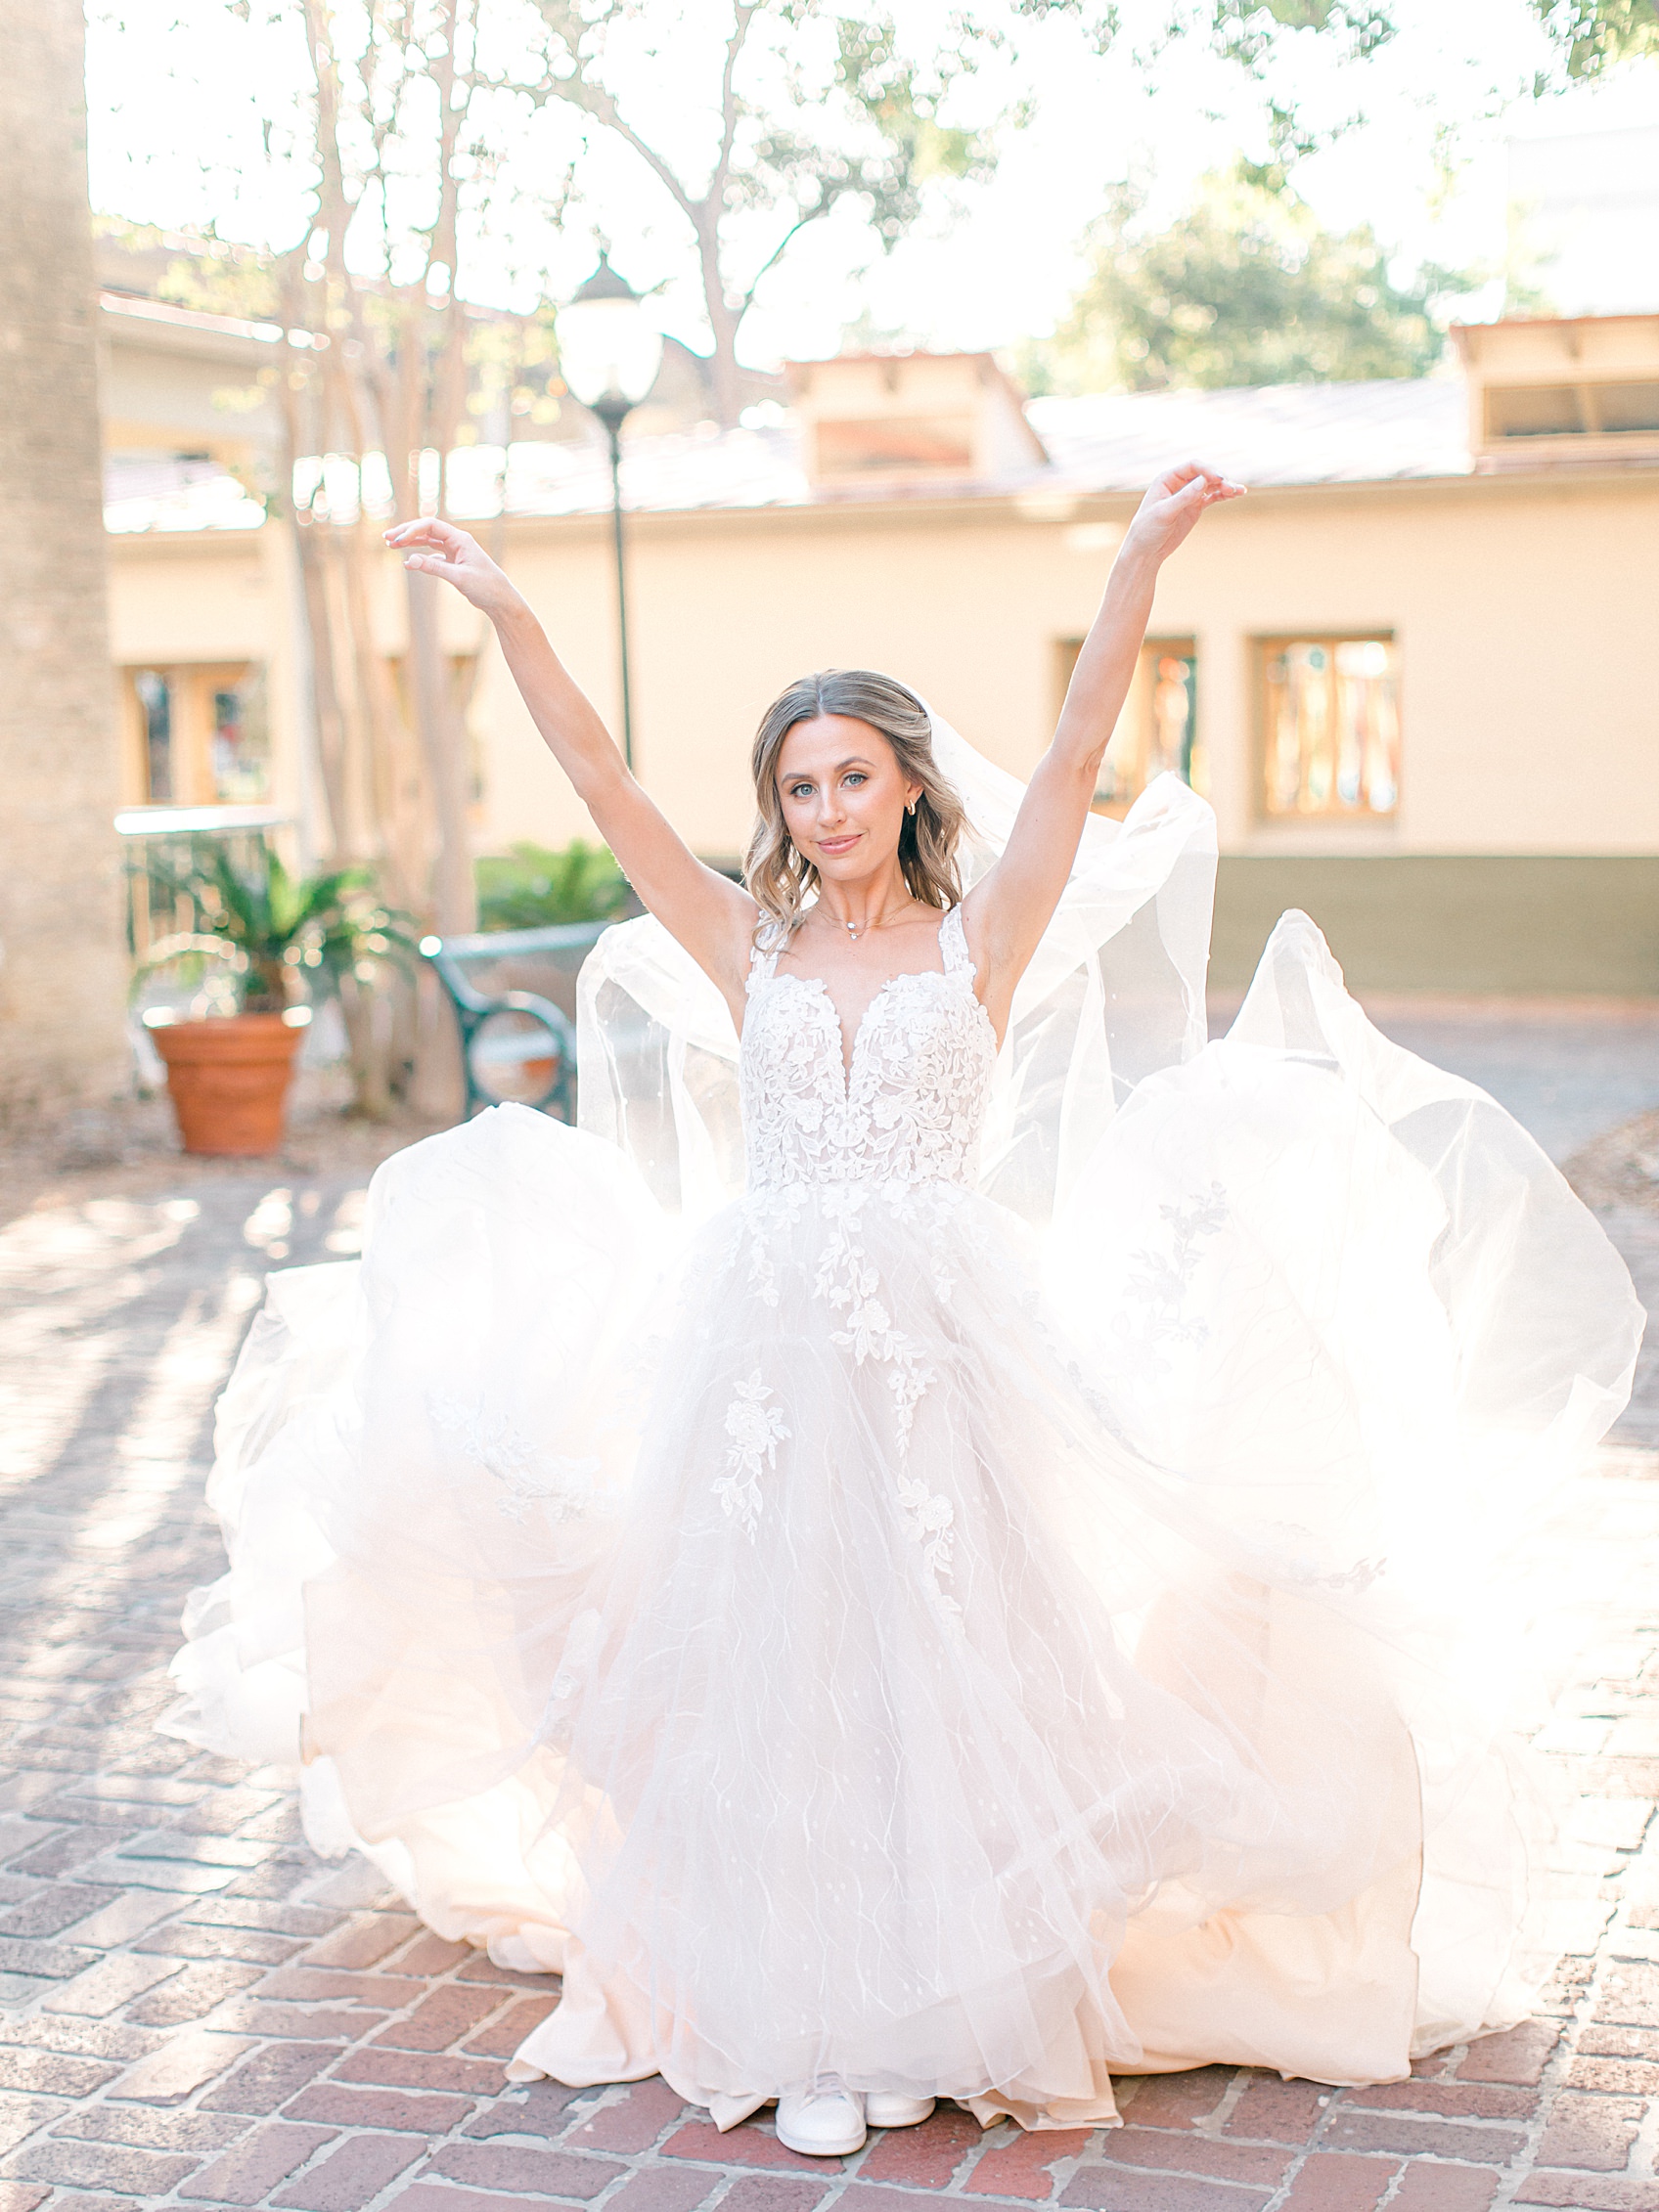 Downtown San Antonio Bridal Photography Session by Allison Jeffers Wedding Photography 0021